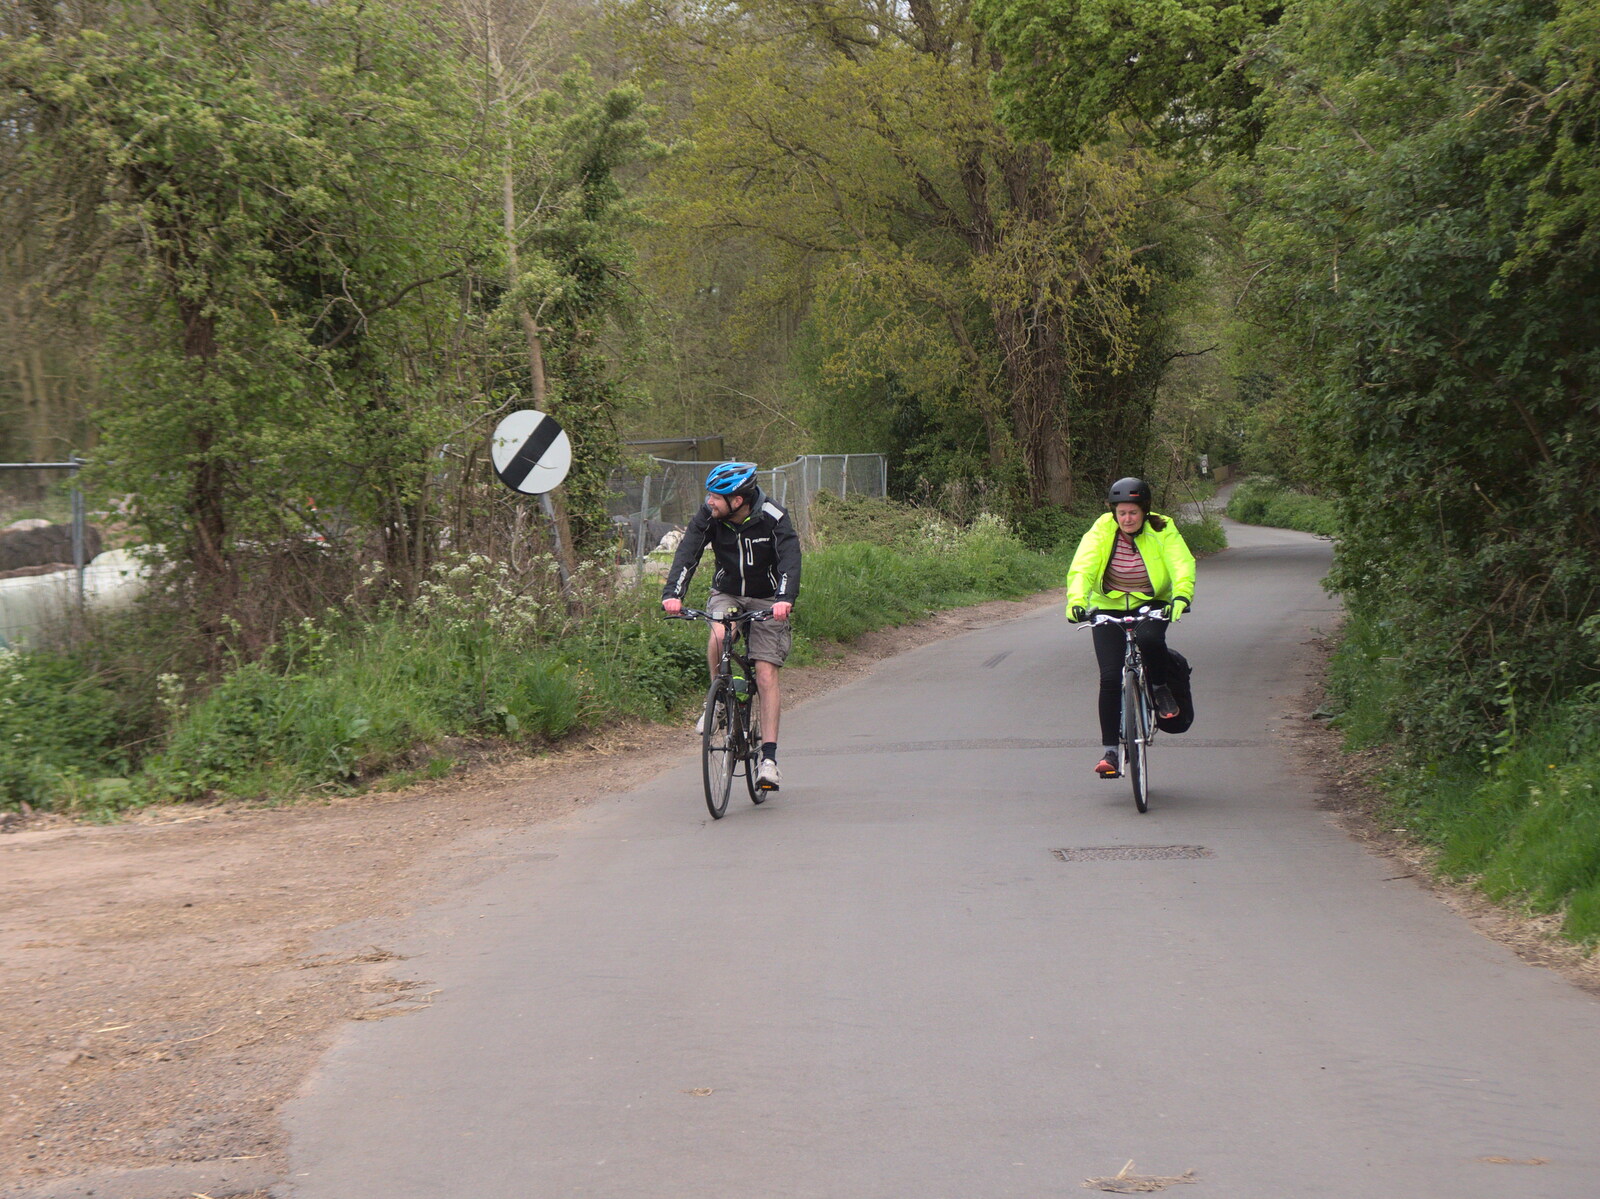 Phil and Isobel ride up from The BSCC at the King's Head, Brockdish, Norfolk - 13th May 2021